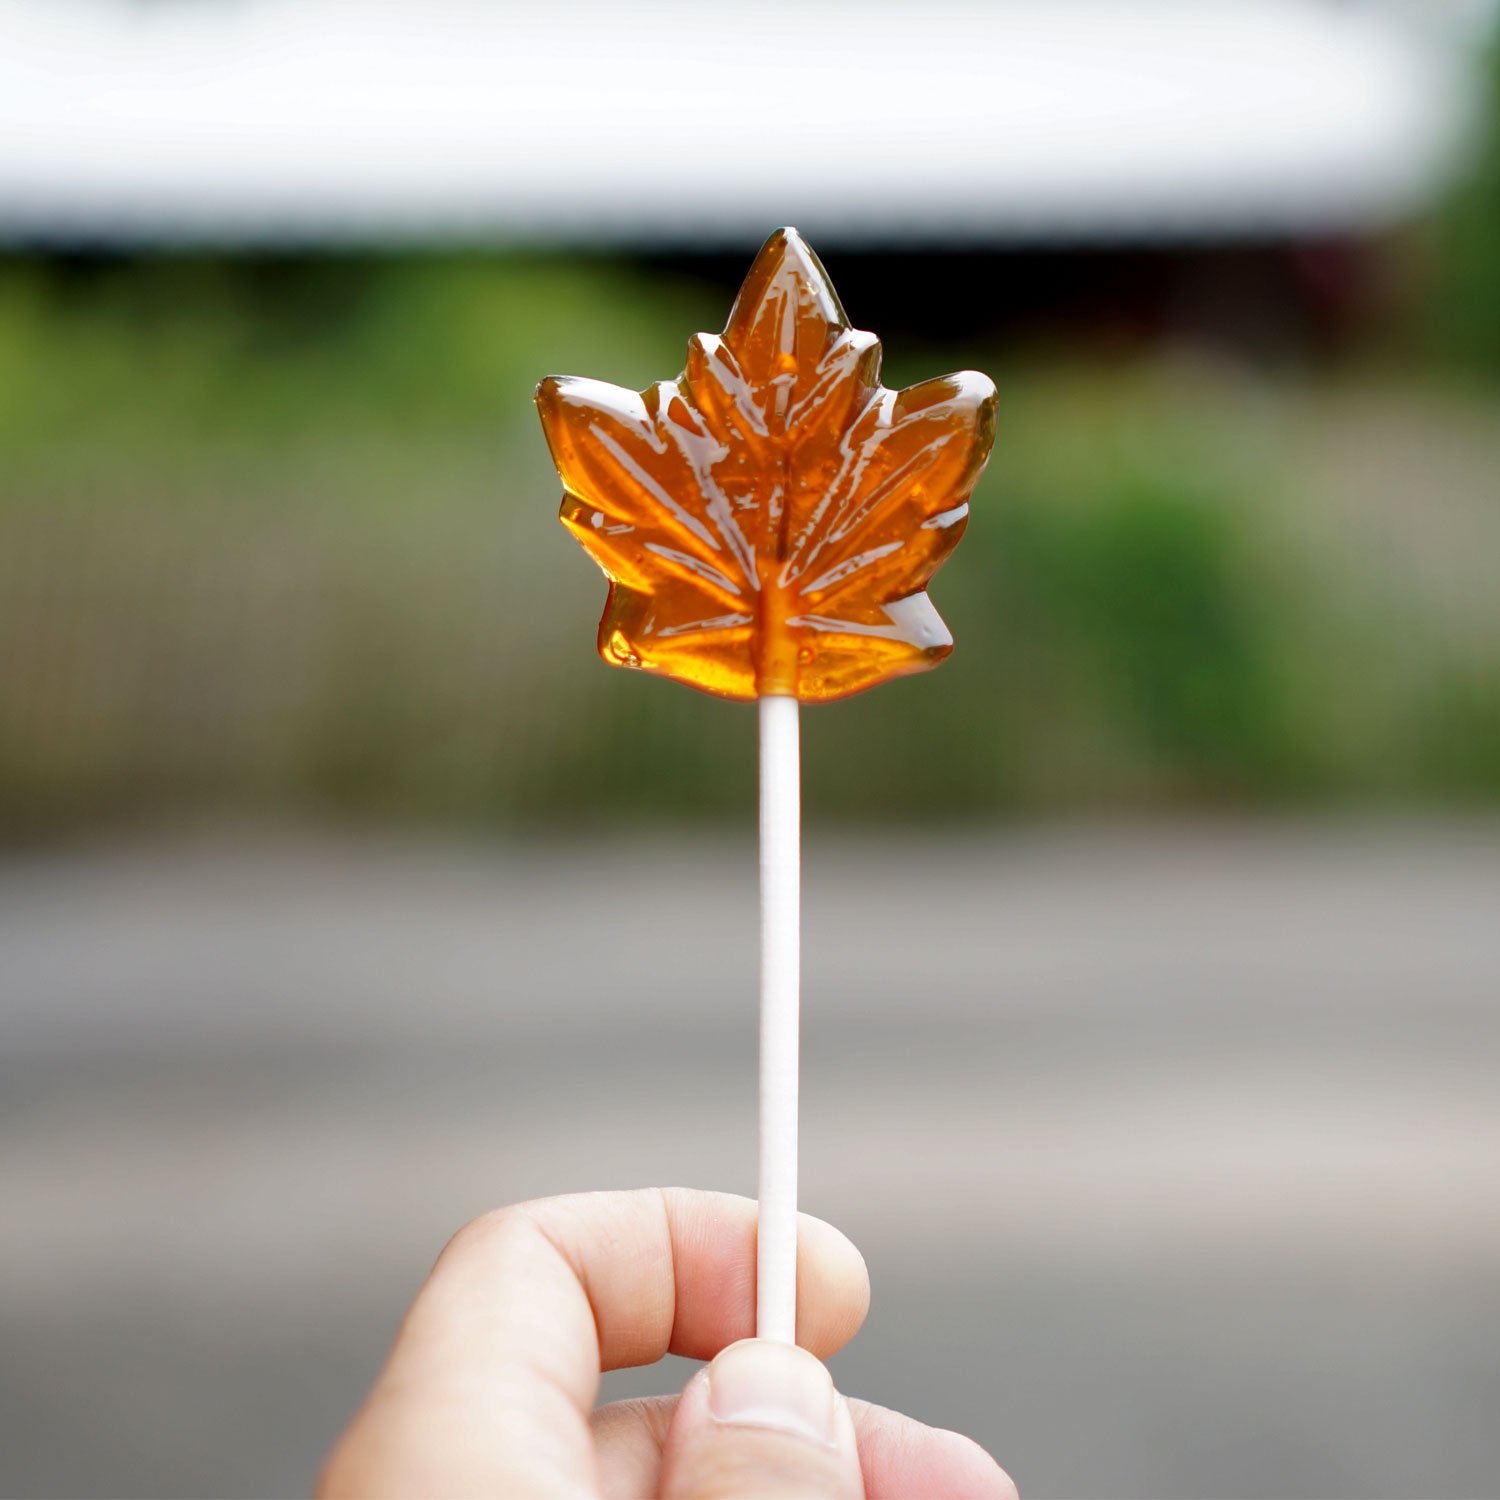  Premium Canadian Maple Sugar Candy Lollipops Made with Pure Maple Syrup from Canada - Tristan Foods (12 lollipops)